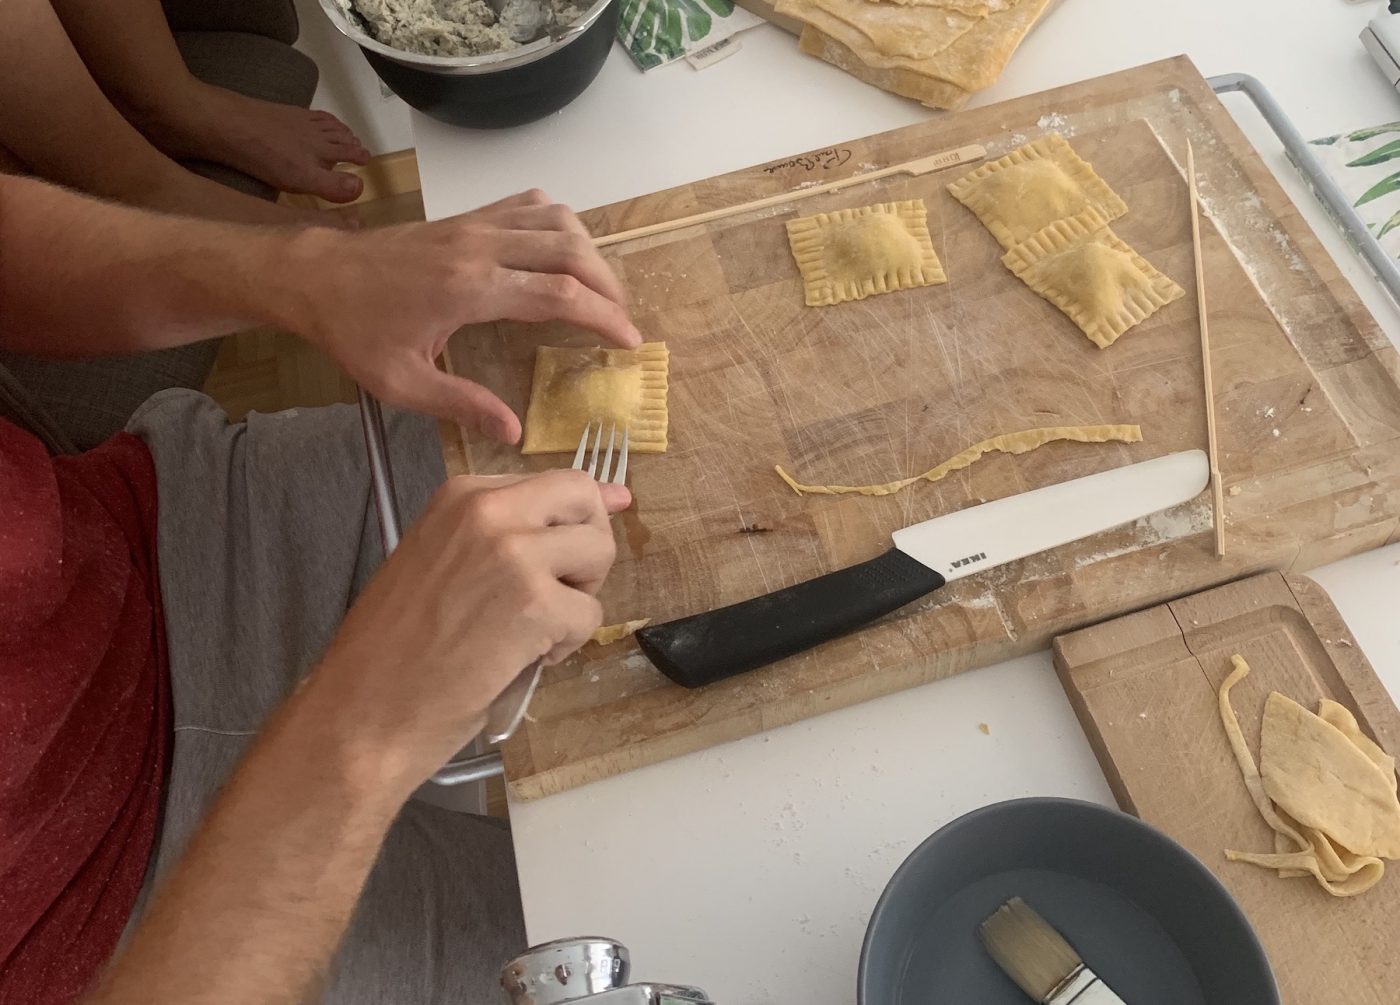 Cooking homemade pasta